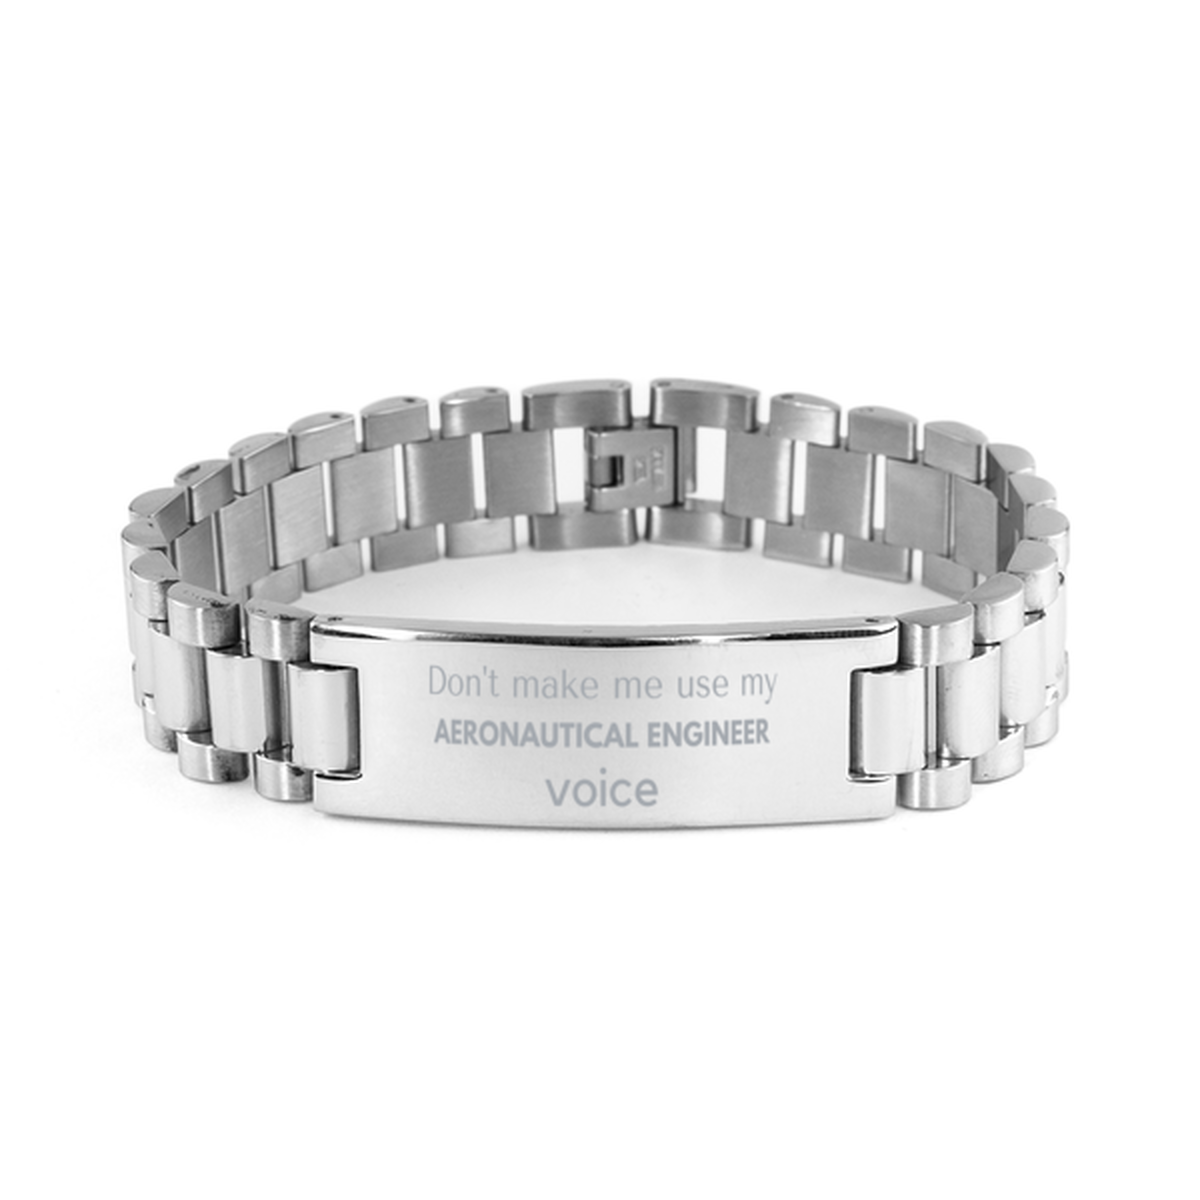 Don't make me use my Aeronautical Engineer voice, Sarcasm Aeronautical Engineer Gifts, Christmas Aeronautical Engineer Ladder Stainless Steel Bracelet Birthday Unique Gifts For Aeronautical Engineer Coworkers, Men, Women, Colleague, Friends